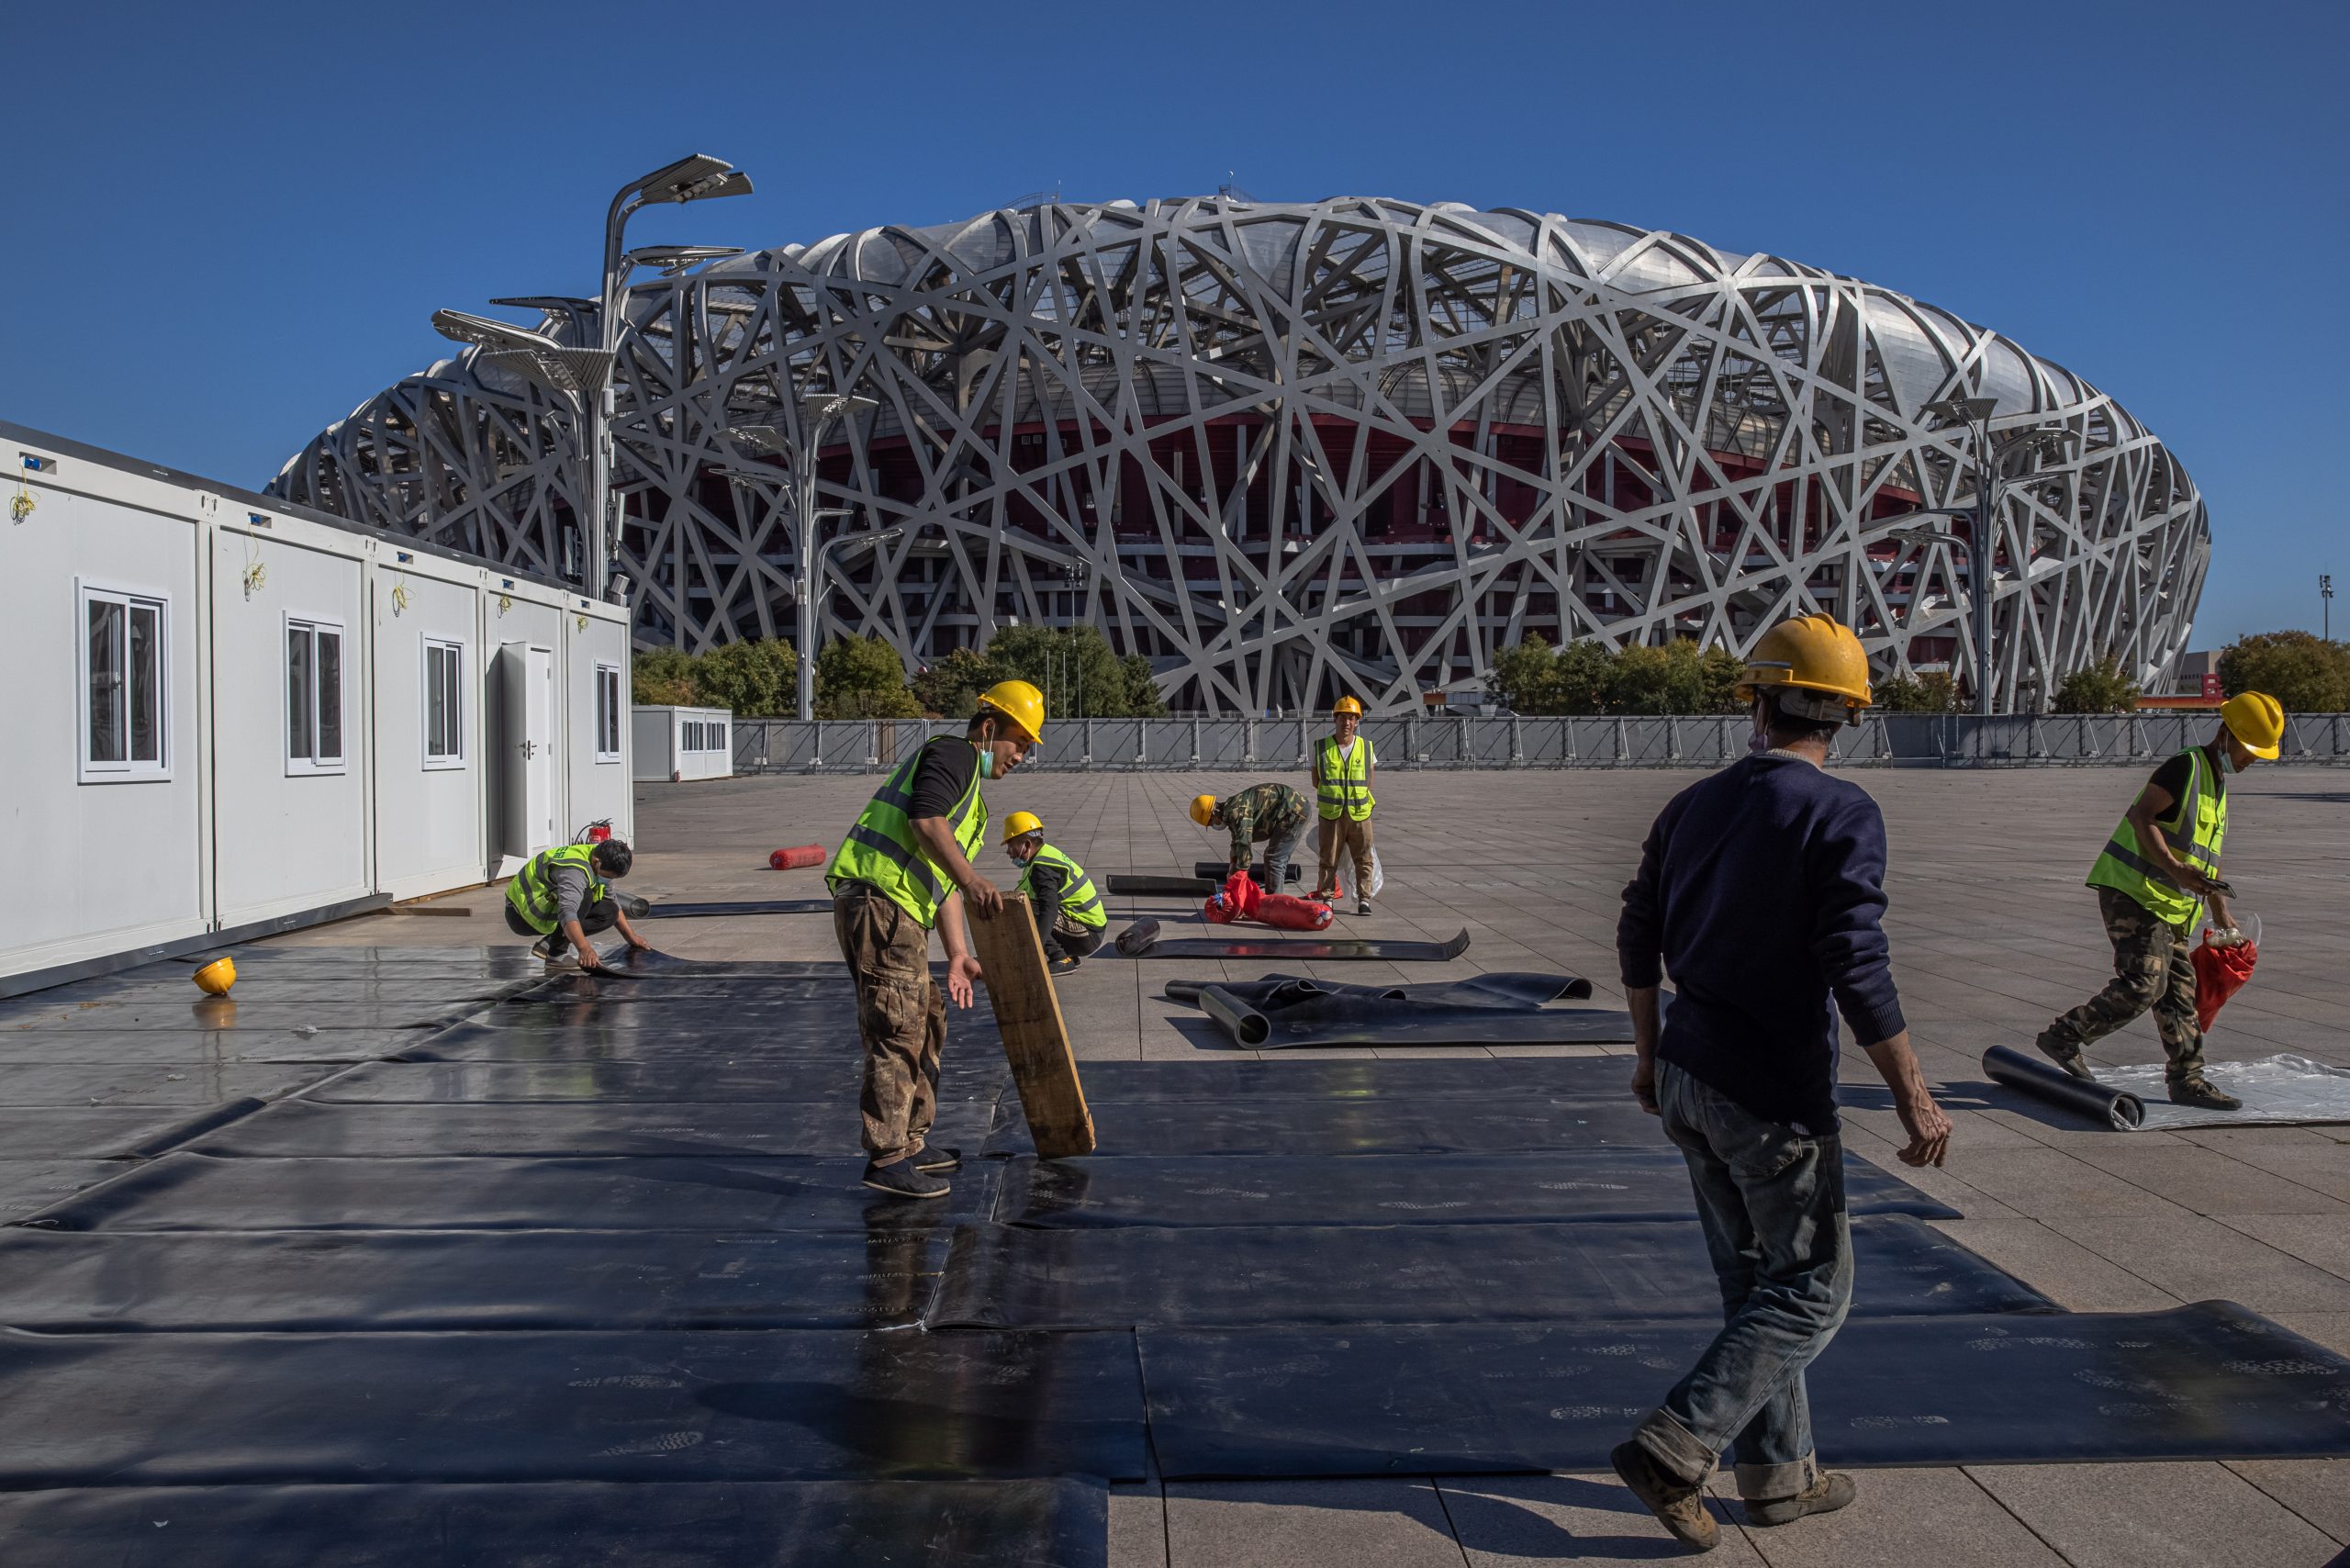 epa09548186 Employees work in front of the National Stadium, also known as Bird's Nest which is scheduled to be used for the opening and closing ceremonies of 2022 Beijing Winter Olympics and 2022 Winter Paralympics, 100 days before the 2022 Beijing Winter Olympics, in Beijing, China, 27 October 2021. The 2022 Beijing Winter Olympics is scheduled to take place in 100 days from 04 to 20 February 2022, and the Paralympics from 04 March to 13 March 2022.  EPA/ROMAN PILIPEY